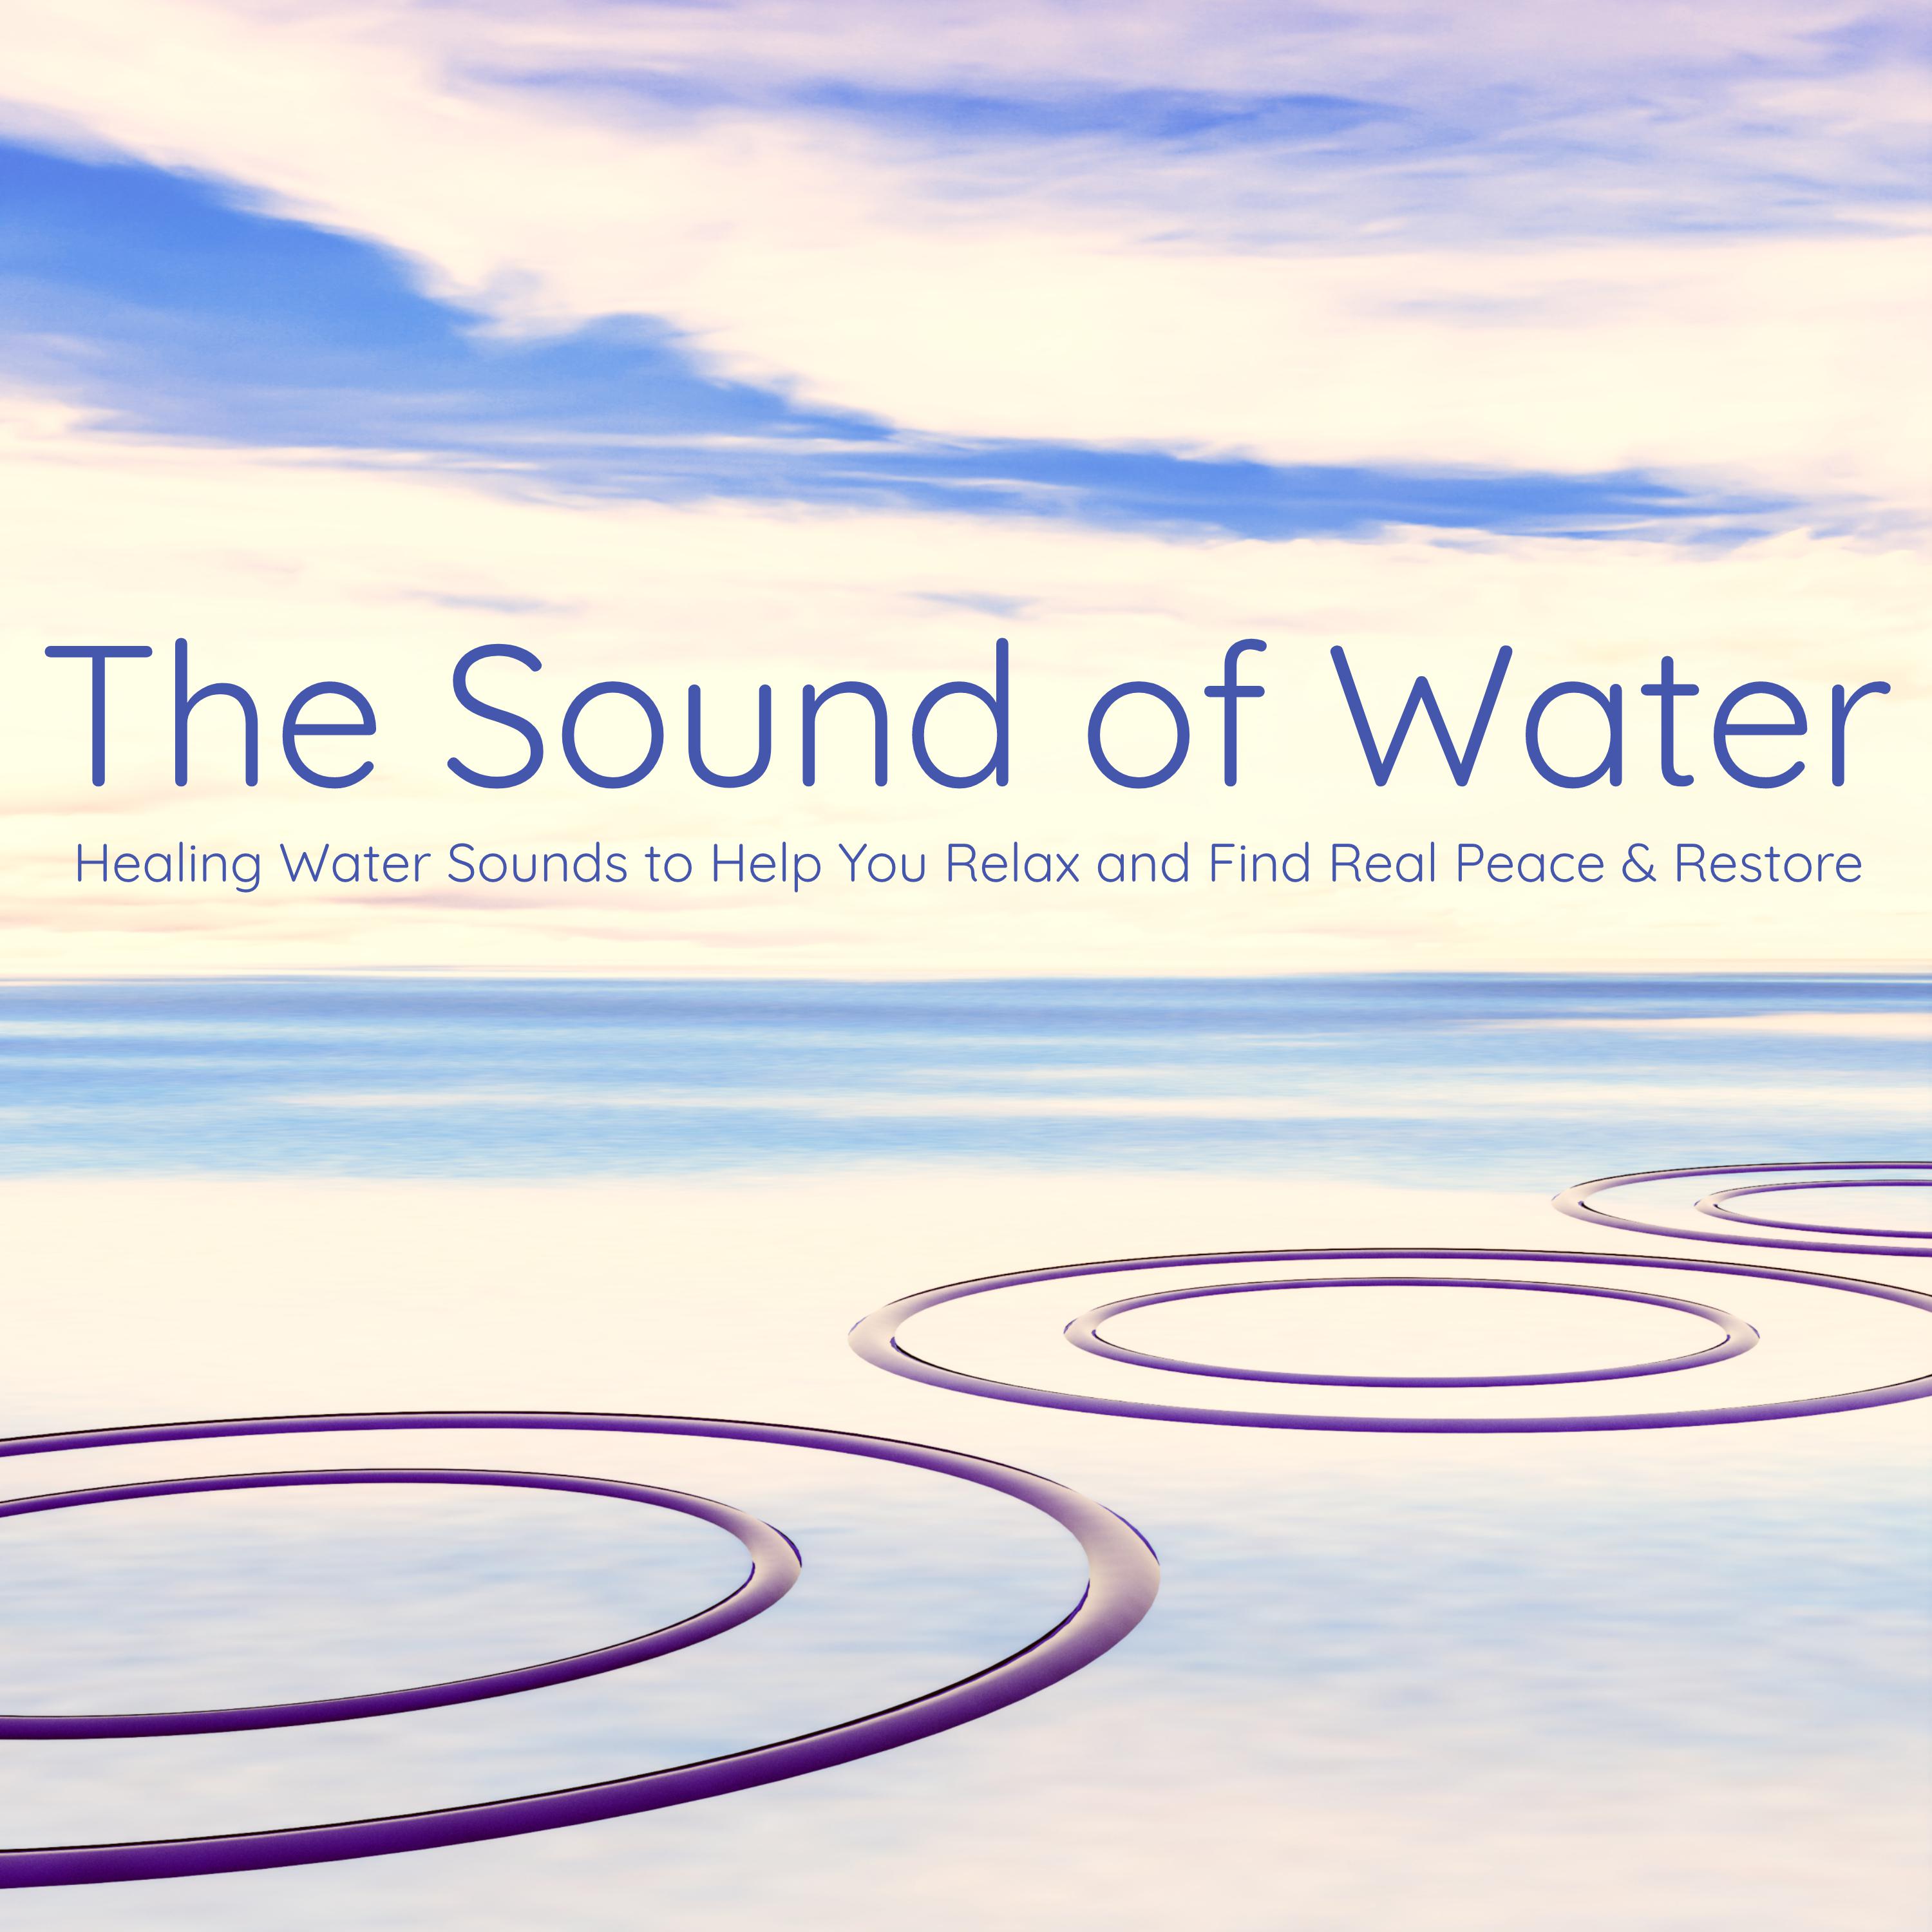 Help You Relax - Cello Sounds and Sea Waves